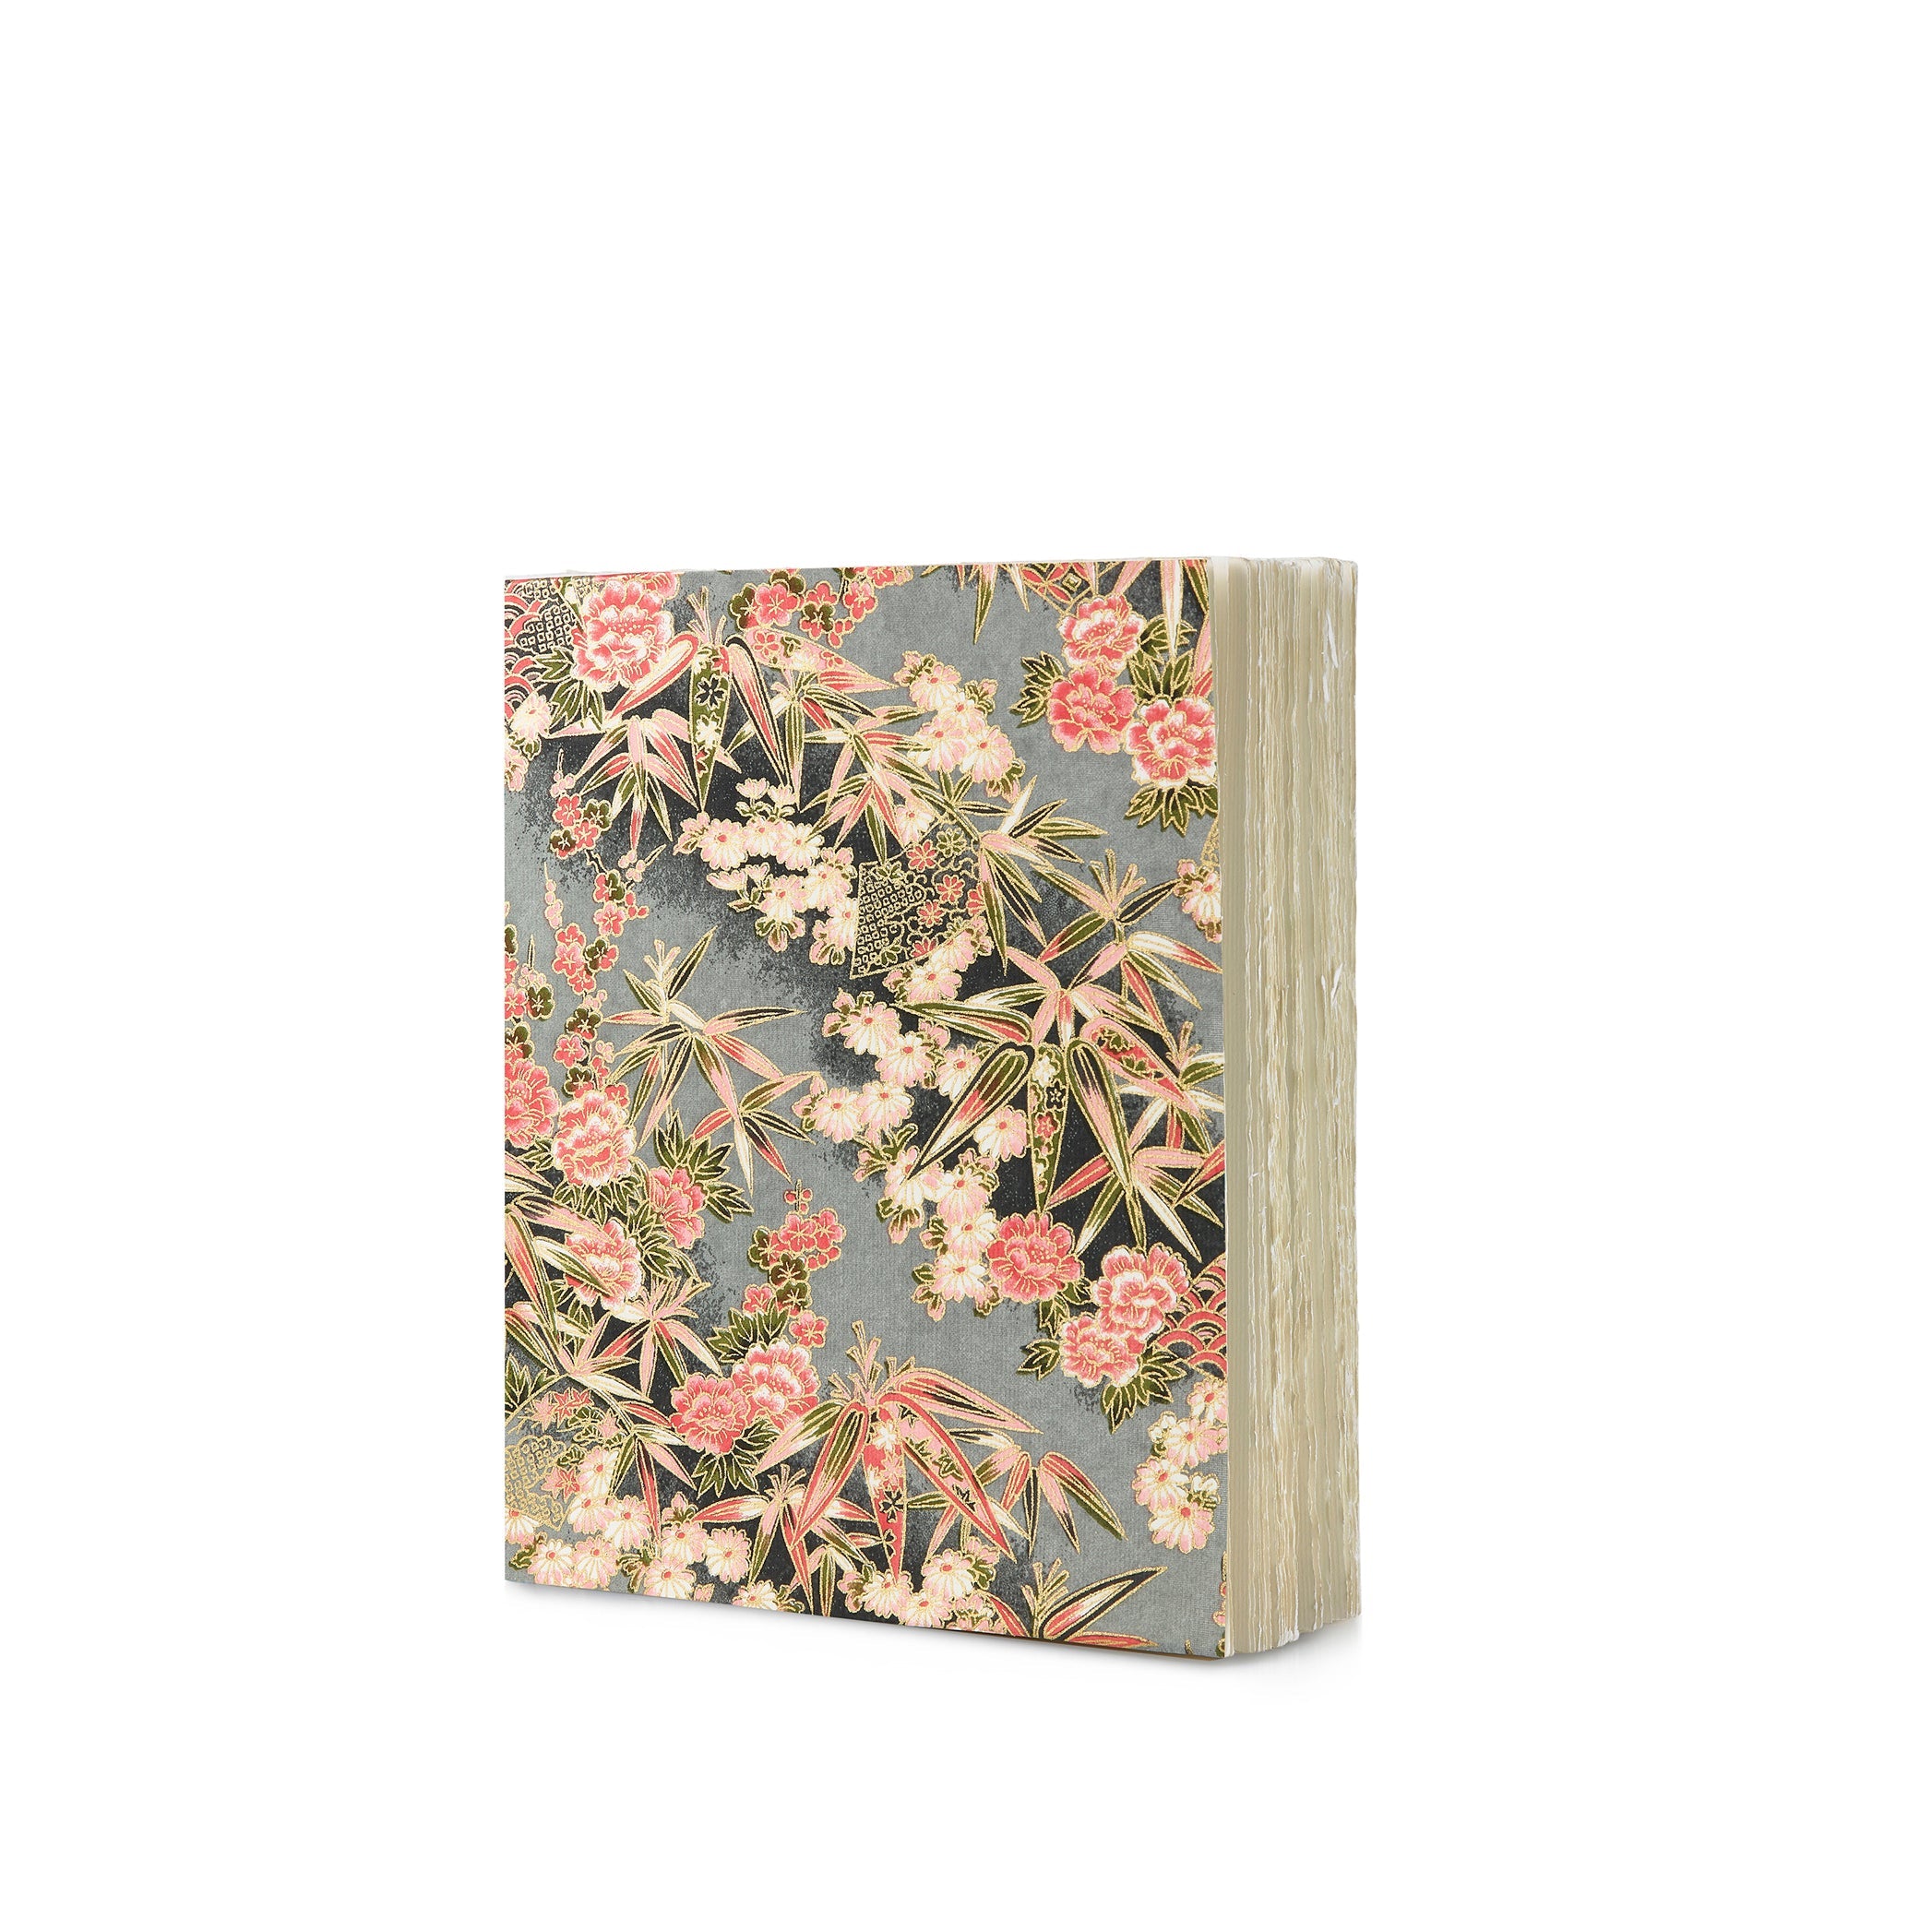 Handprinted Japanese Chiyogami Covered Sketchbook, Pink Bamboo, 20cm x 17cm